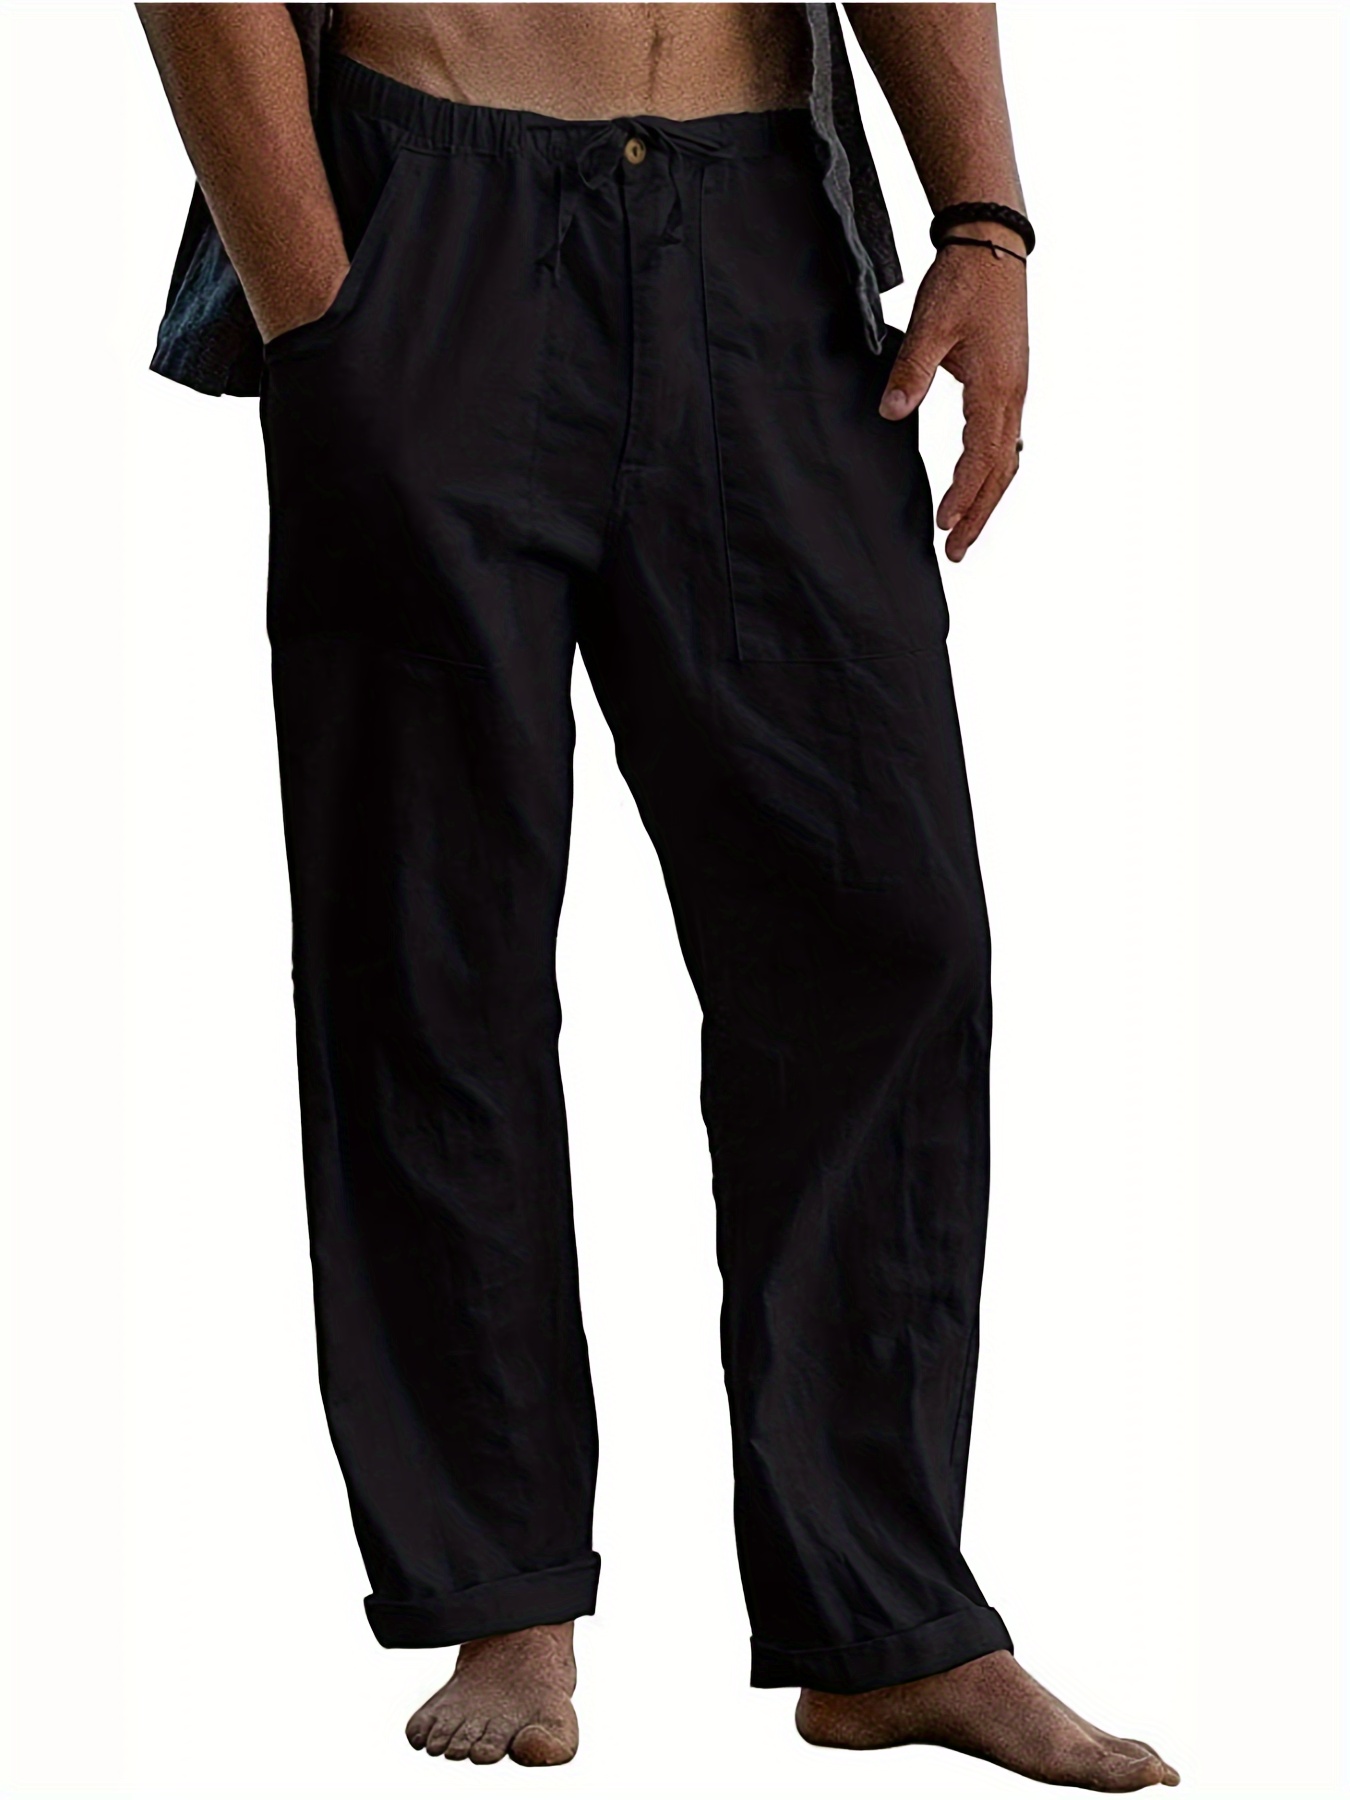 New Arrival Mens Elastic Waist Cotton and Linen Trousers Men Solid